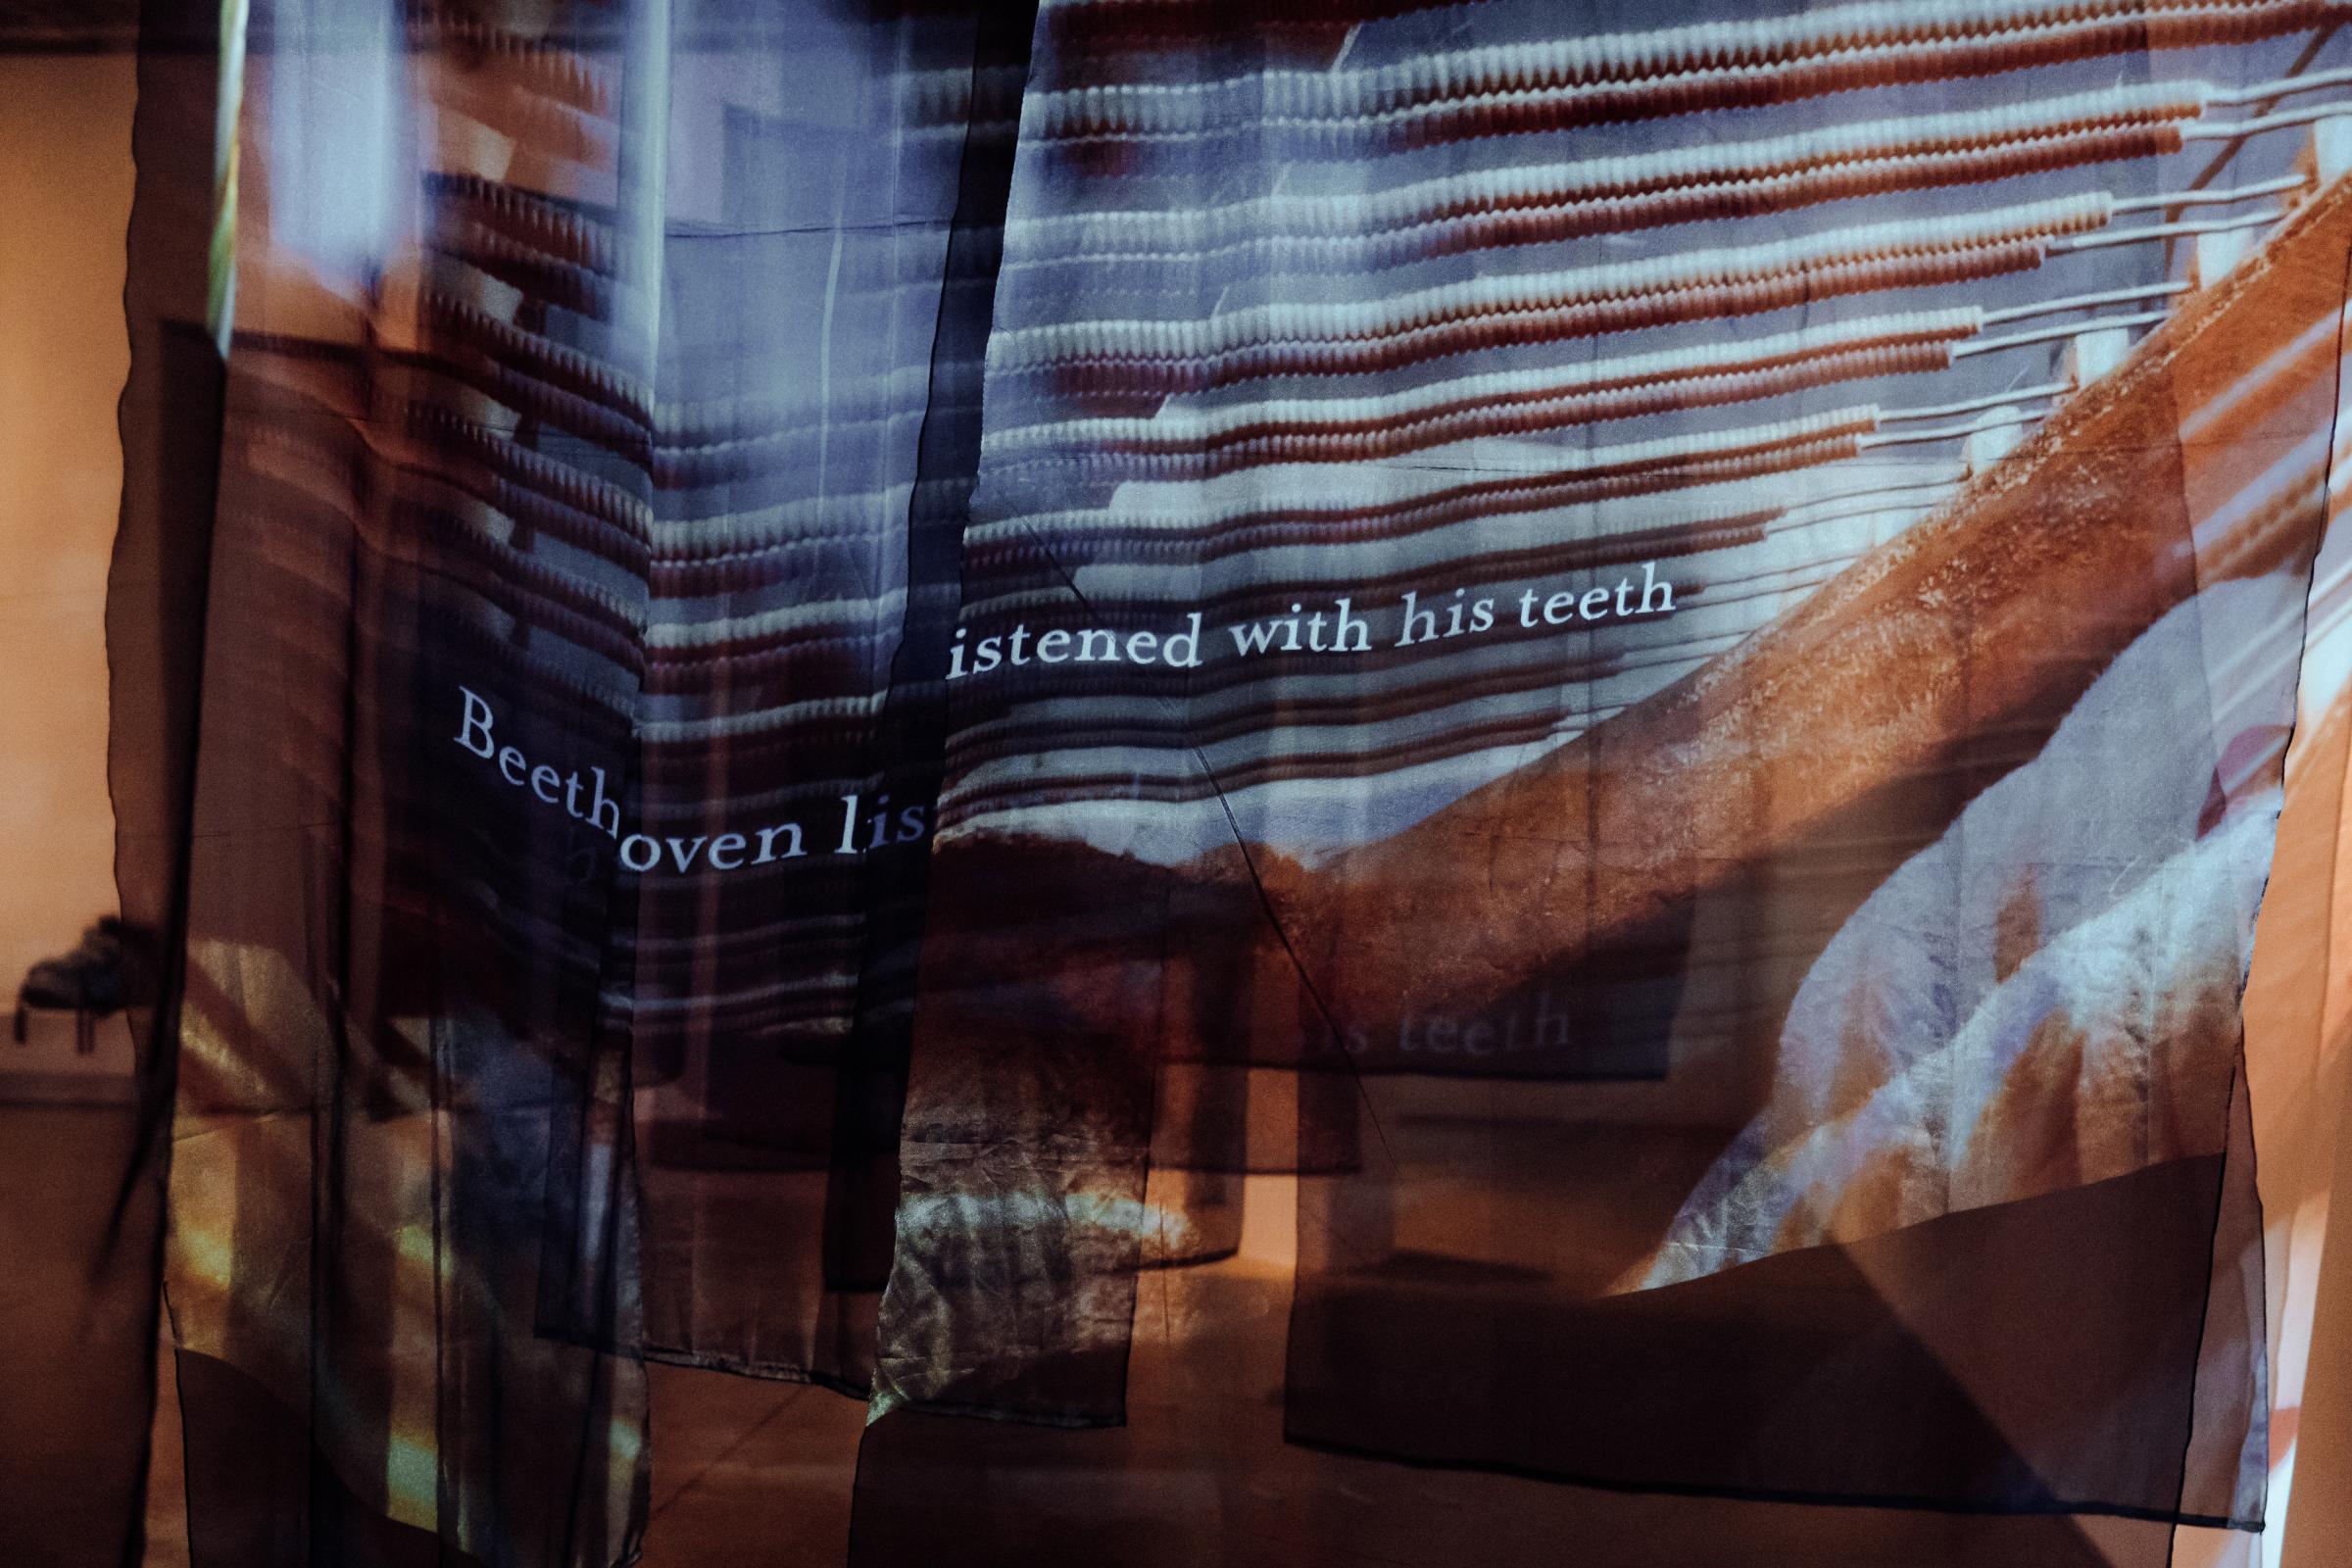 Projected in white onto translucent black fabric, the words “Beethoven listened with his teeth” are written against a blurry image of a piano. 

